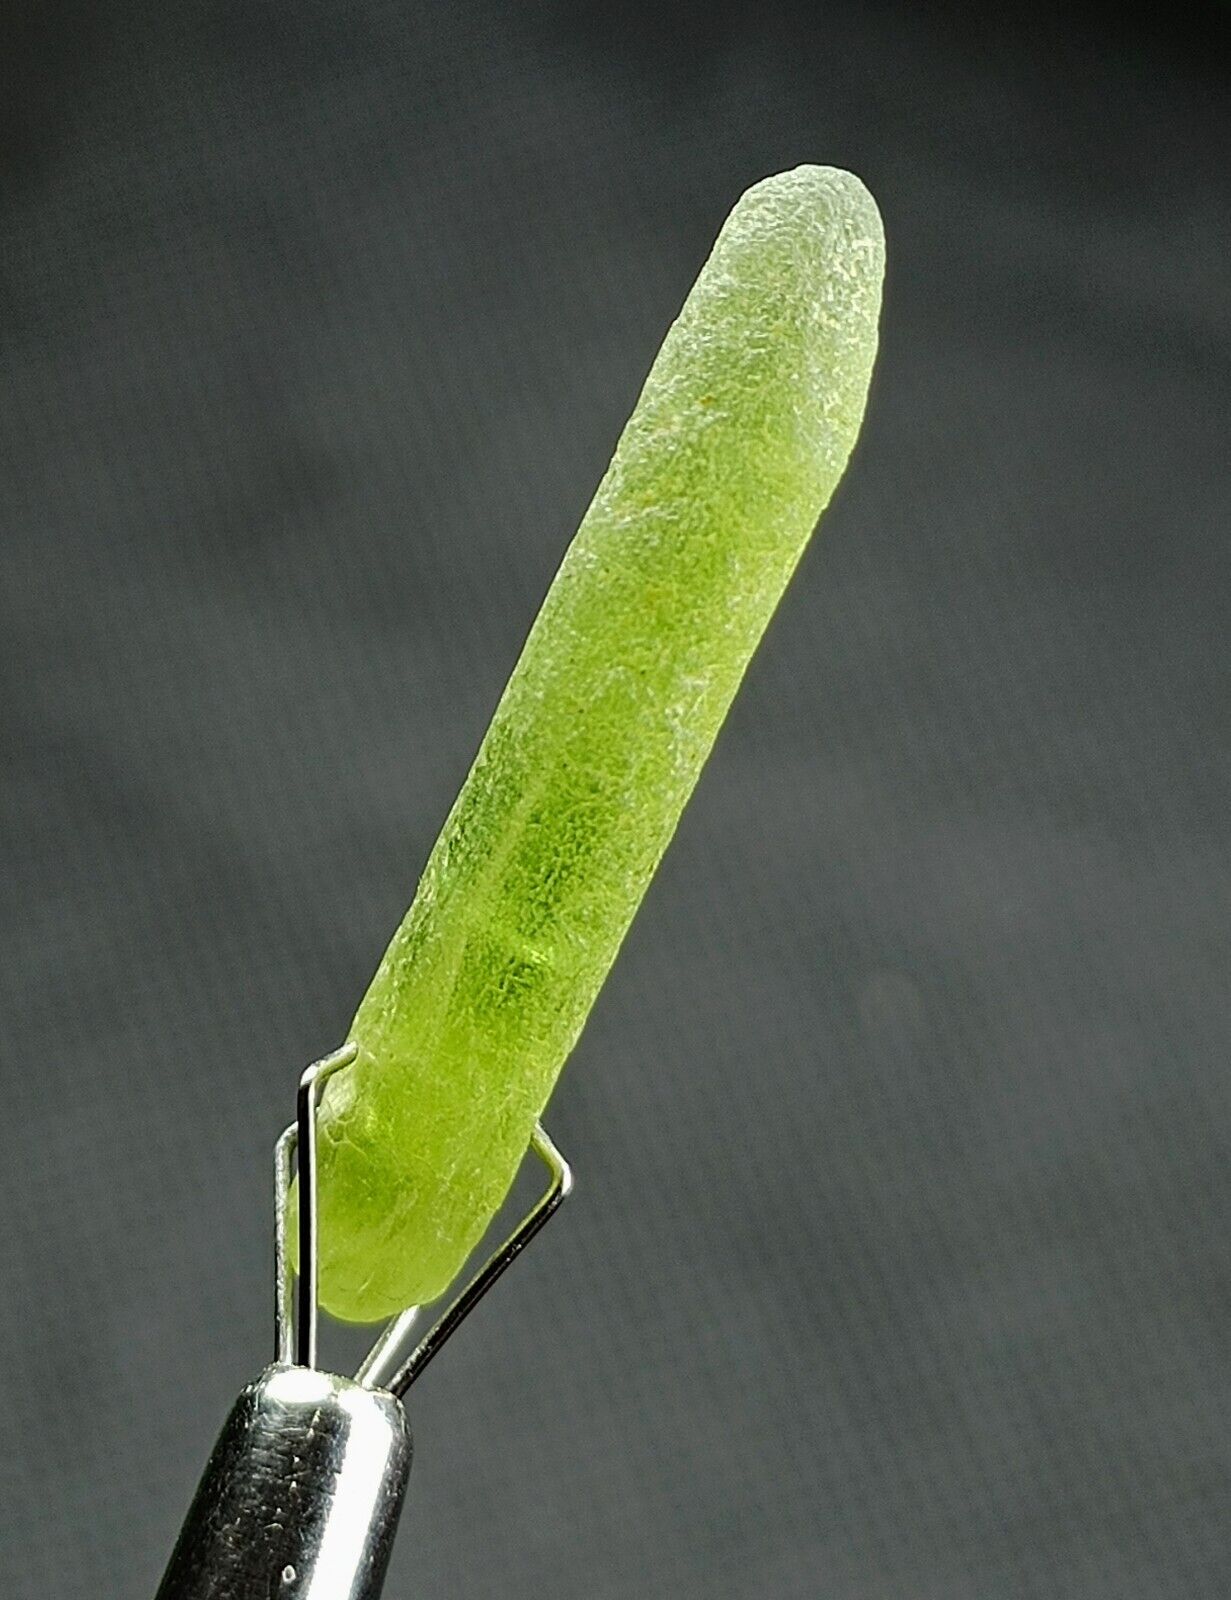 11 CT Natural Peridot Terminated Crystal with nice formation - Pakistan 